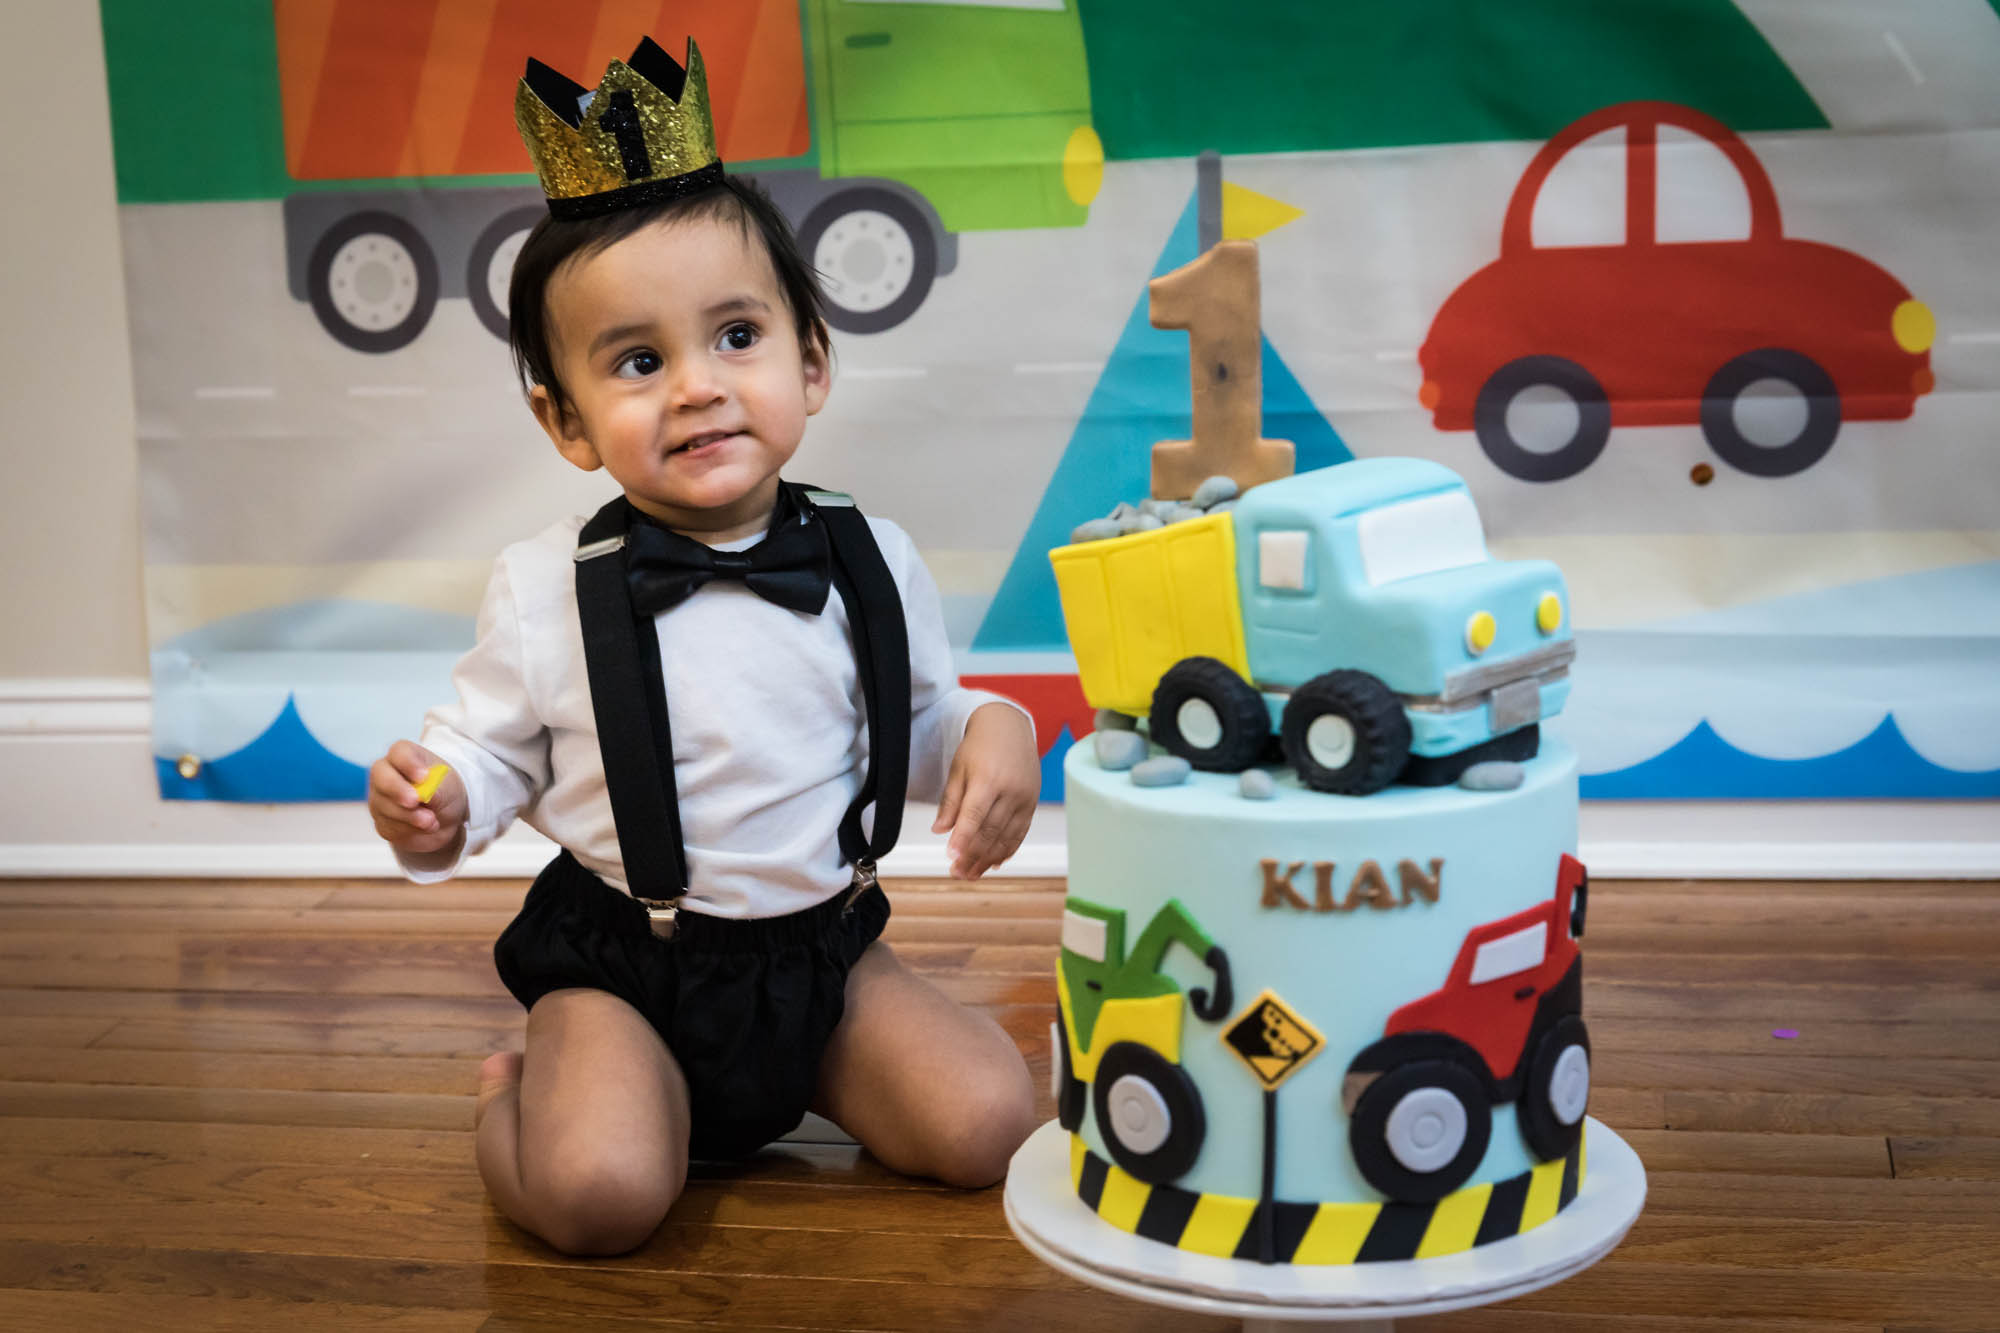 Little boy sitting on wooden floor in front of truck-themed cake wearing gold crown and black bow tie for an article on cake smash tips